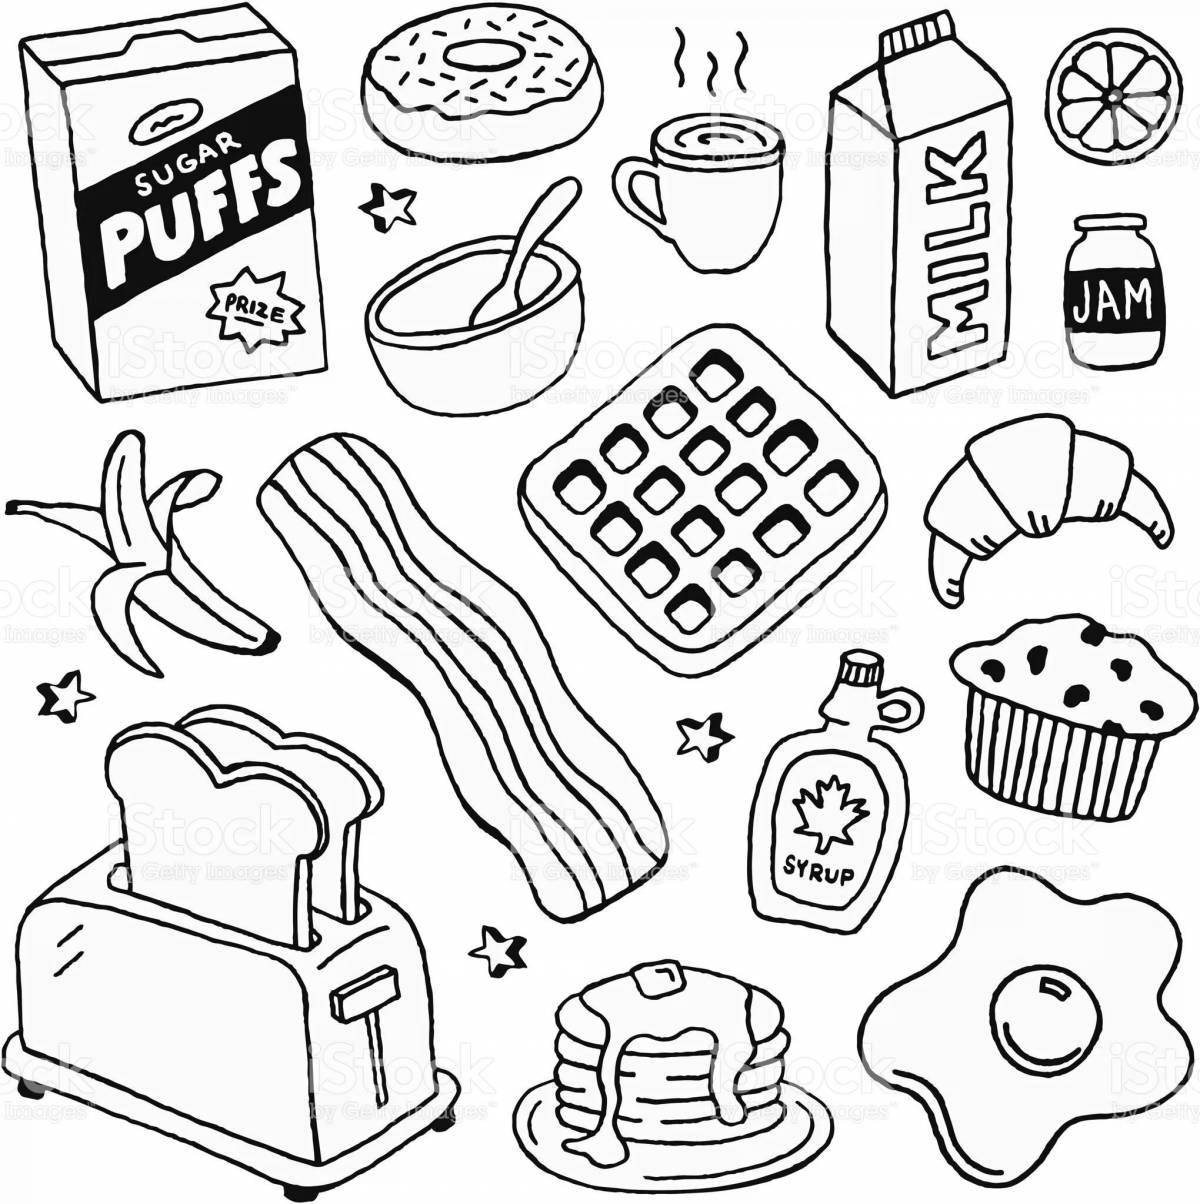 Adorable little food sticker coloring book